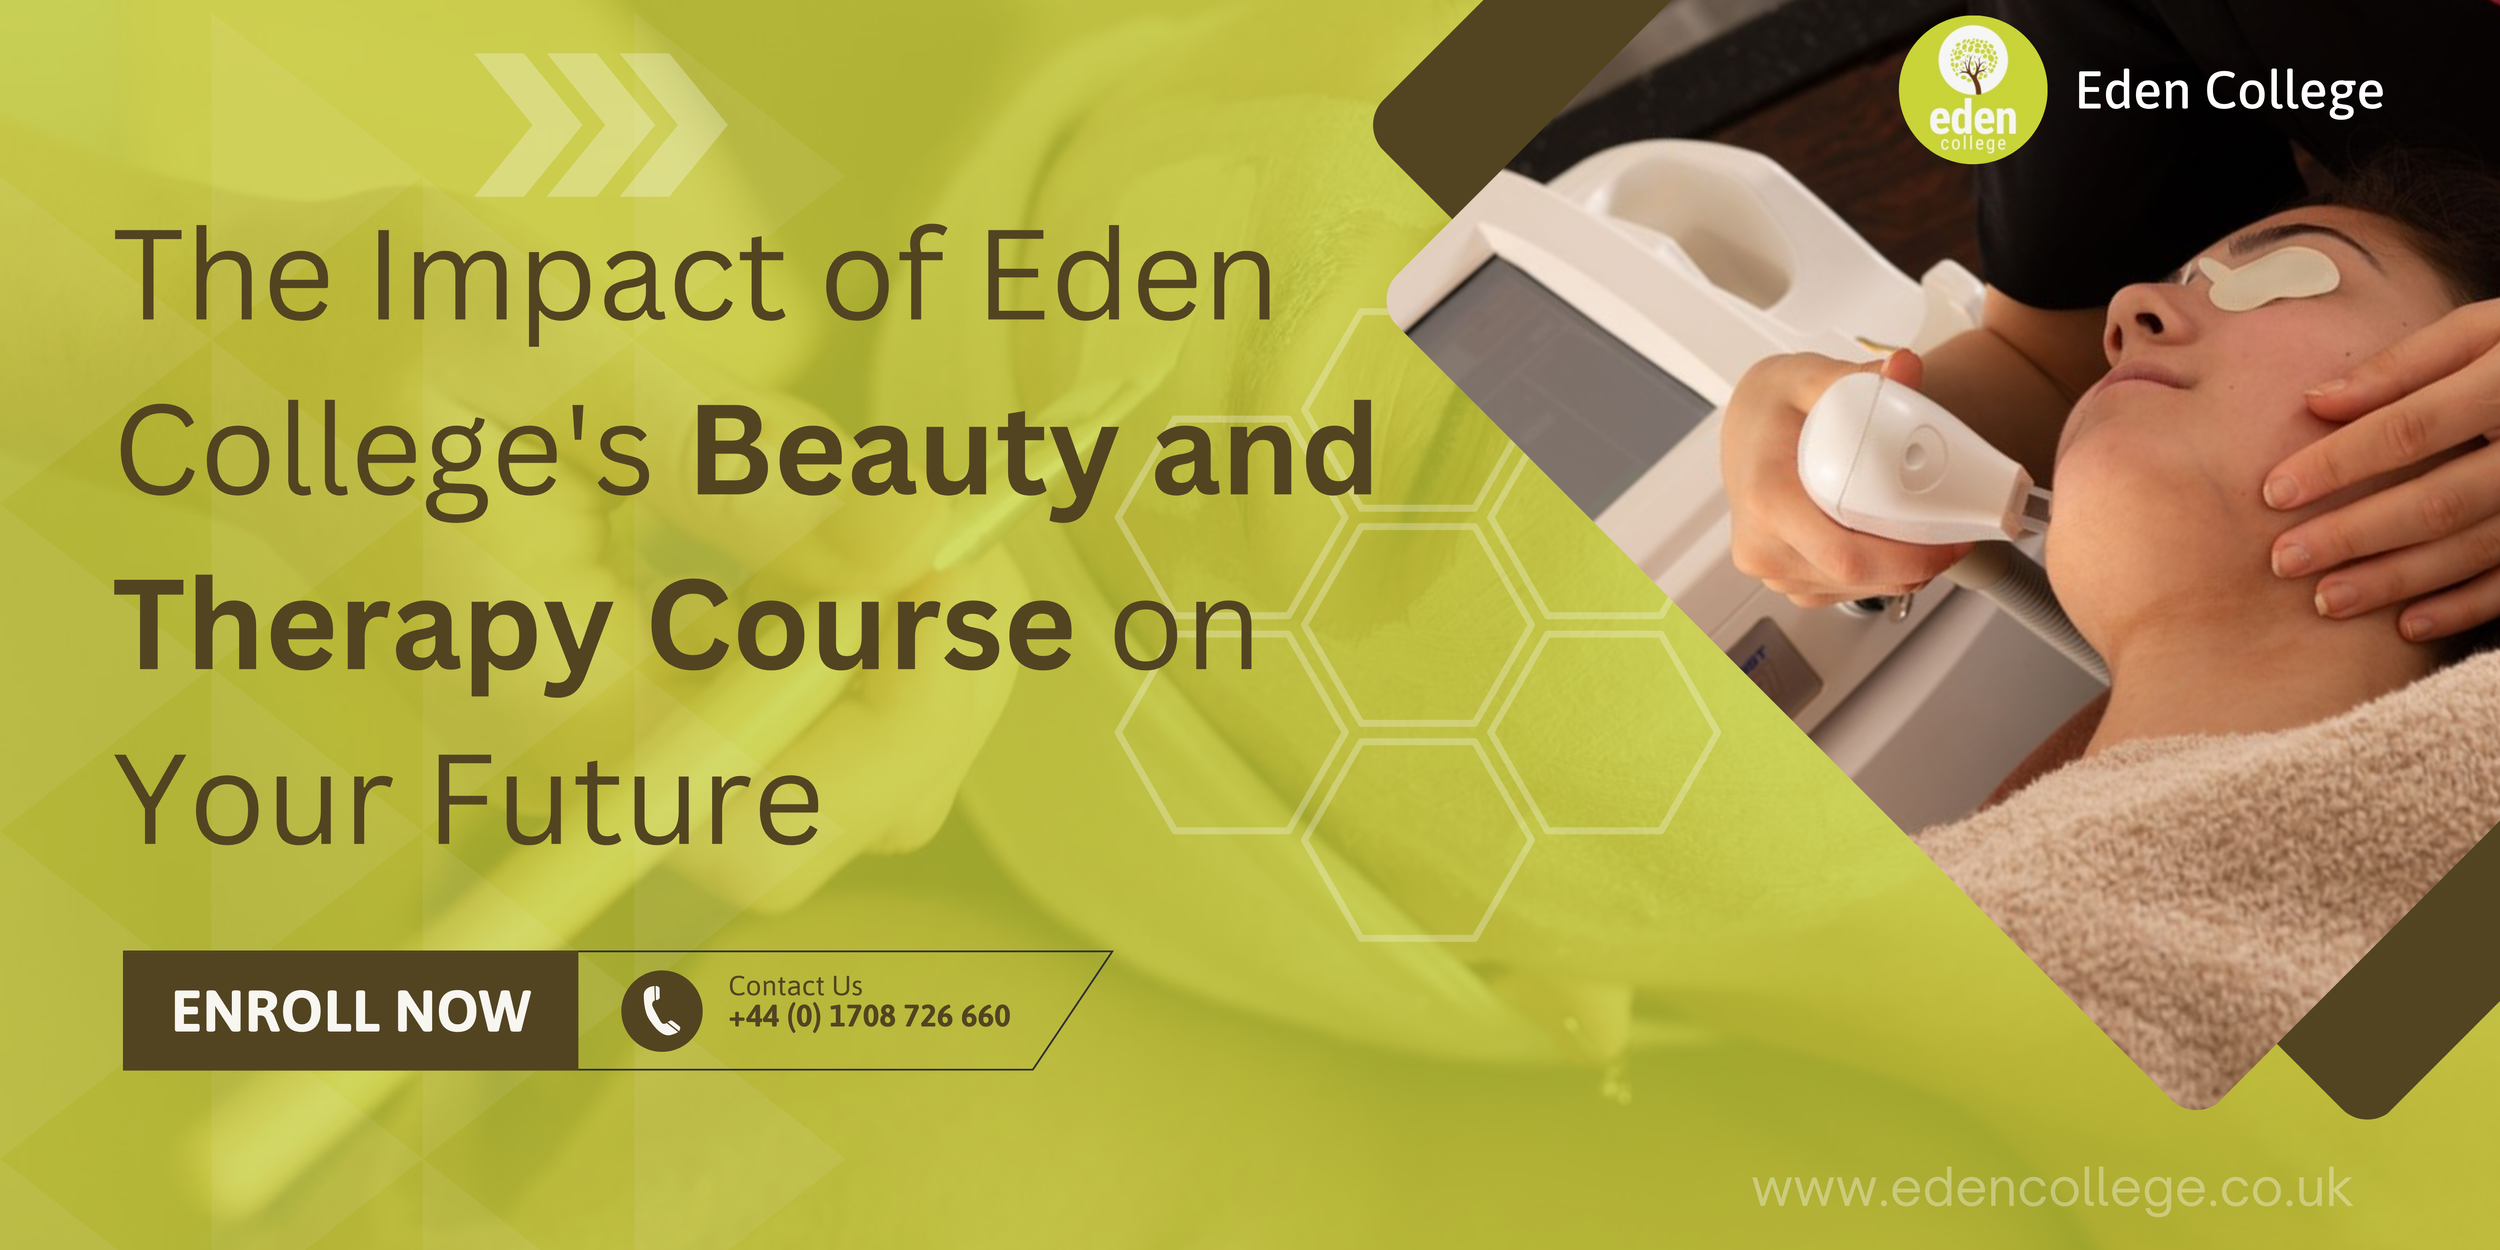 The Impact of Eden College's Beauty and Therapy Course on Your Future